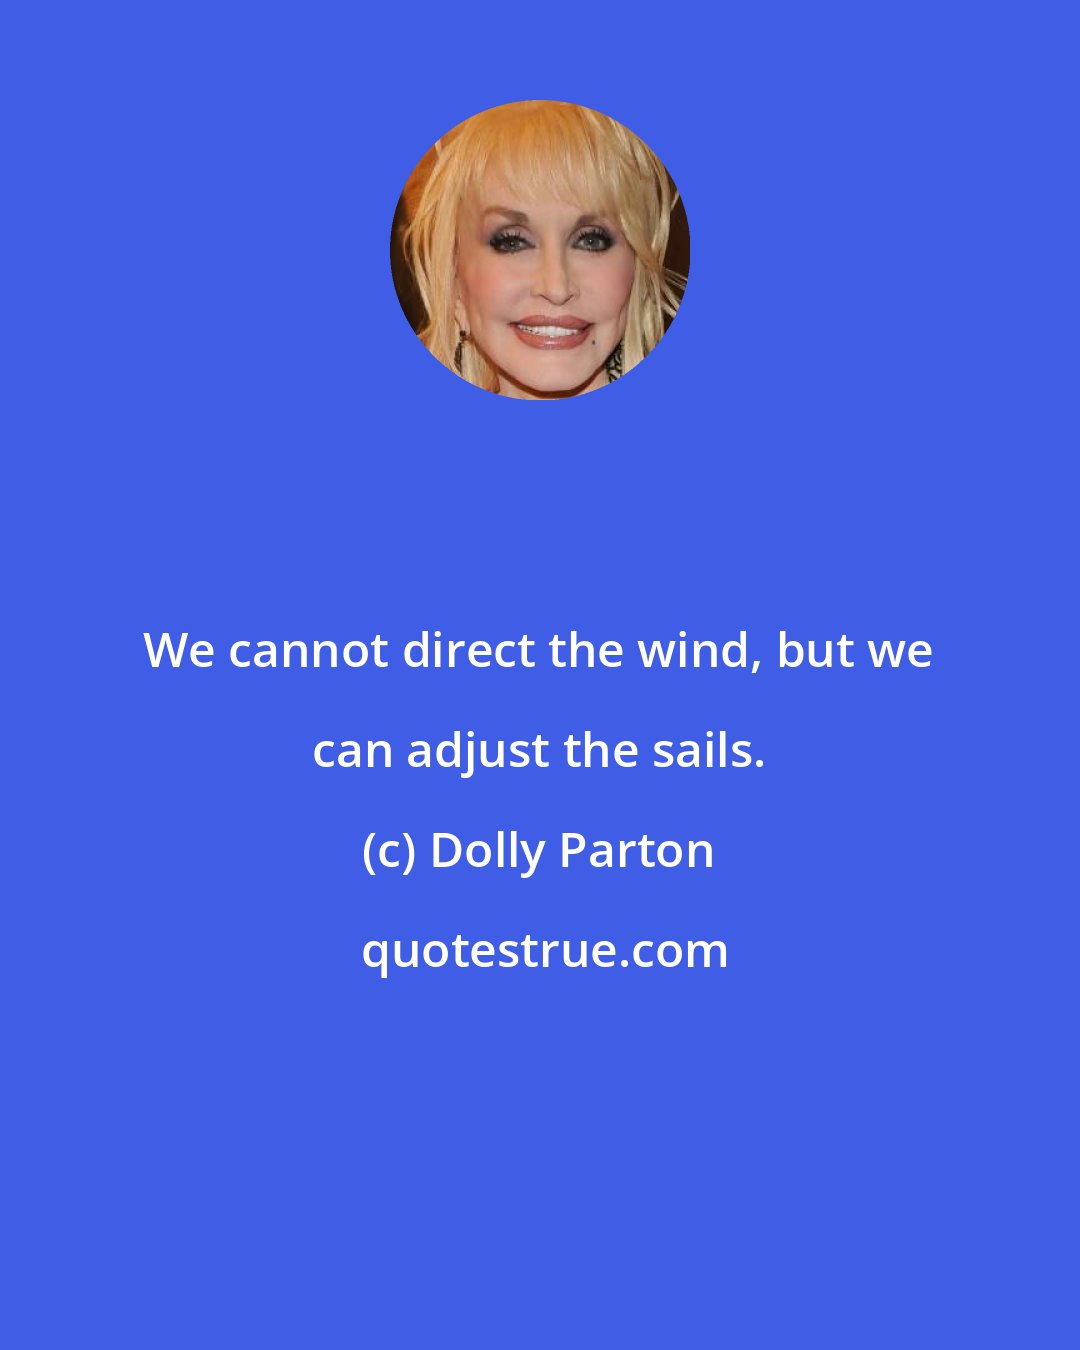 Dolly Parton: We cannot direct the wind, but we can adjust the sails.